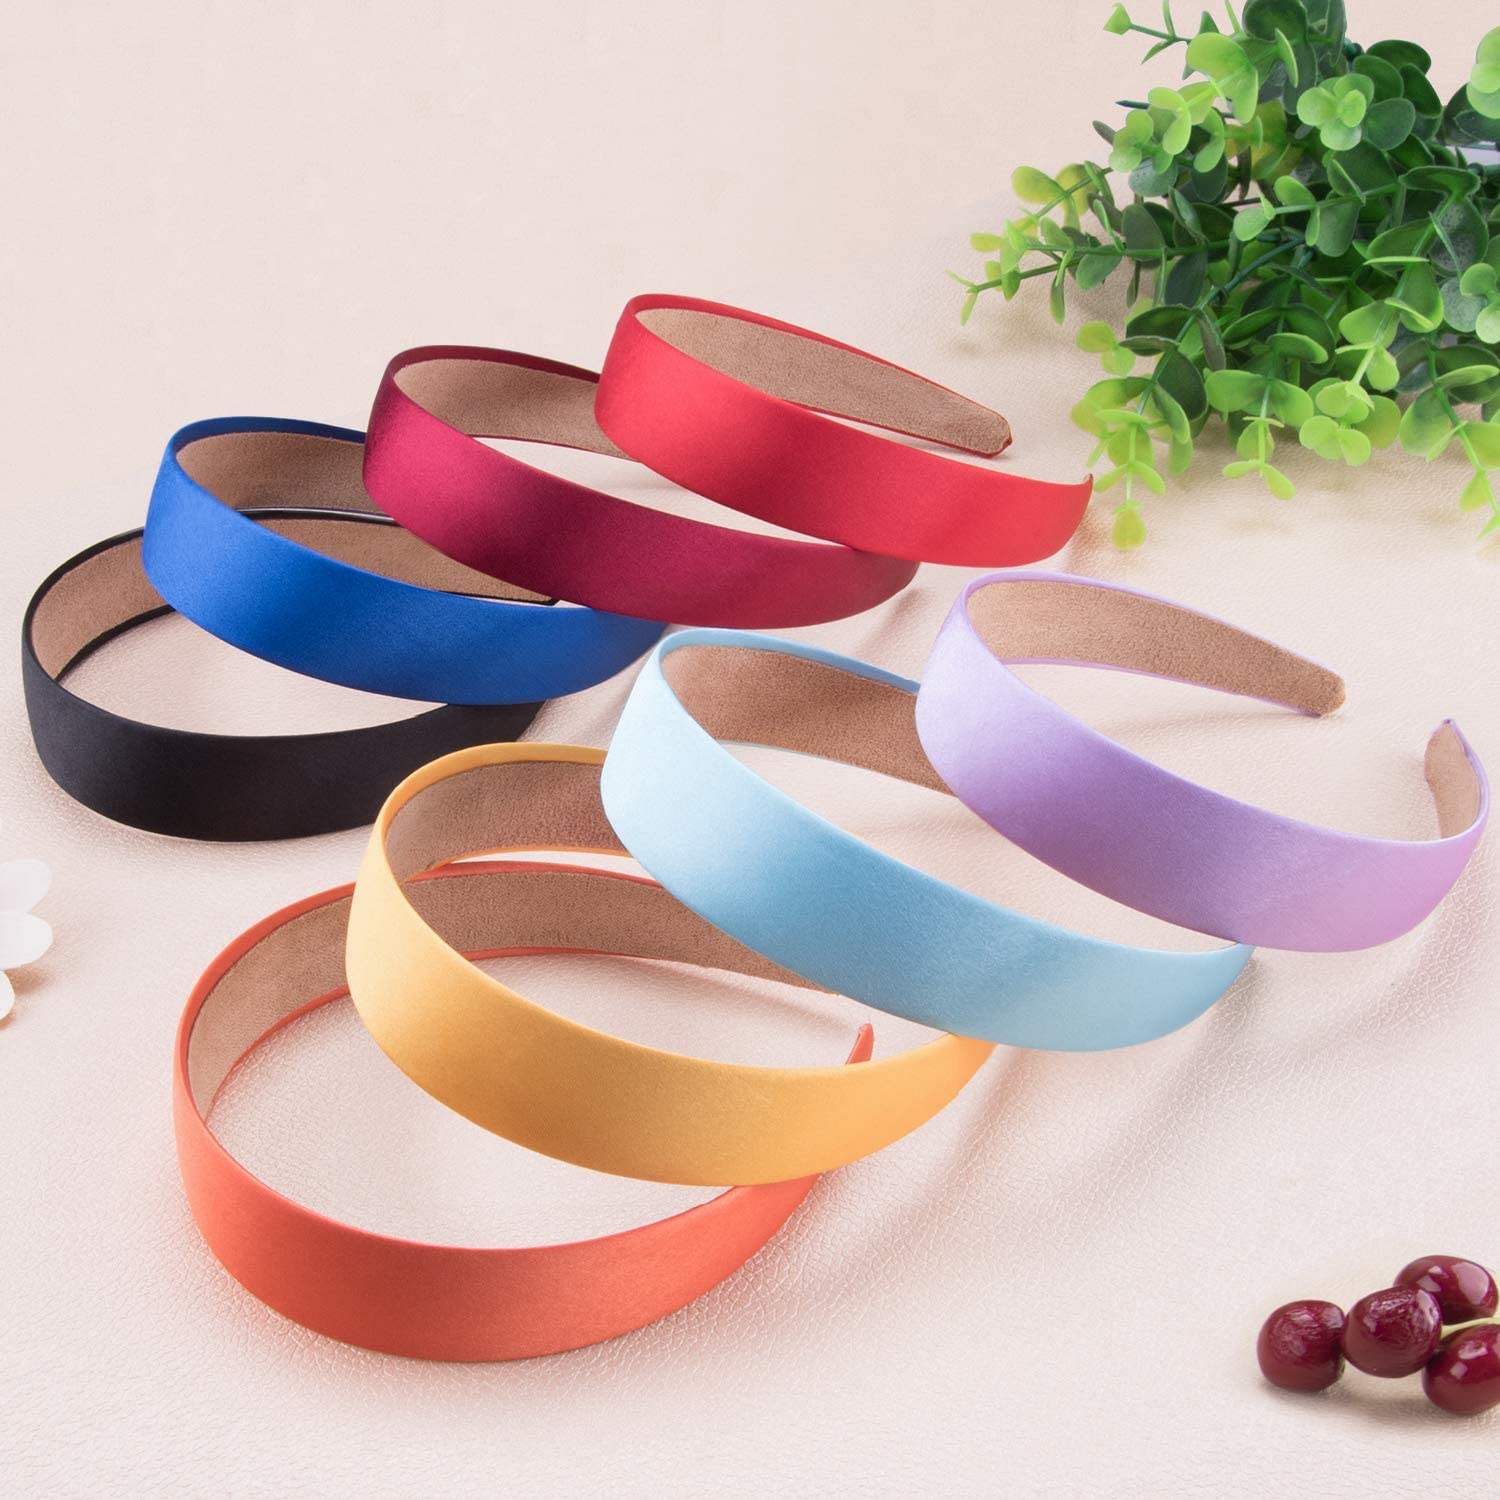 SIQUK 24 Pieces Satin Headbands 1 inch Wide Headband Colorful Non-Slip Headbands for Women and Girls, 24 Colors